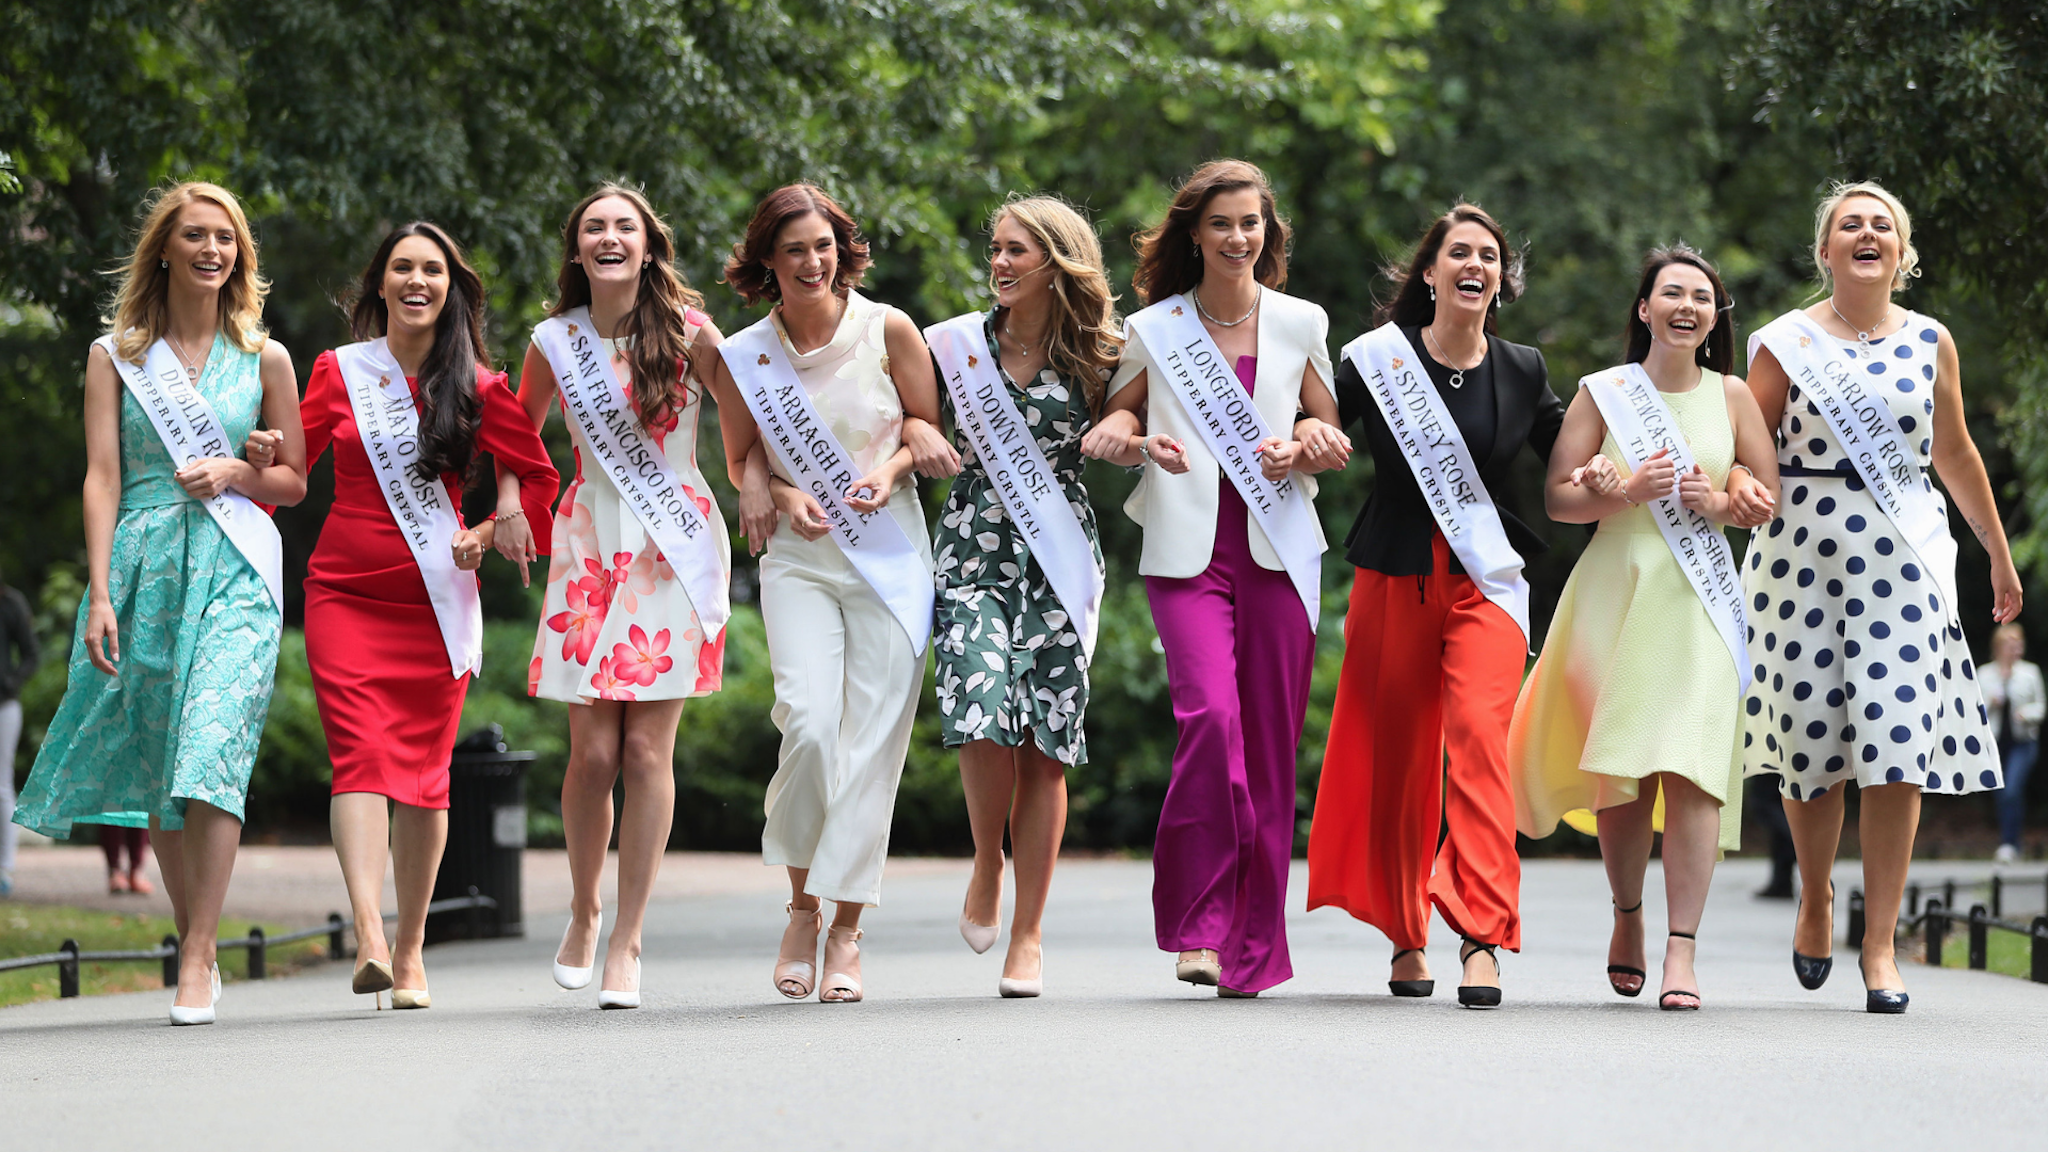 Roses from Ireland and overseas who are preparing for their journey to Tralee, for the Rose of Tralee International Festival, take part in a photocall at Stephen's Green in Dublin.